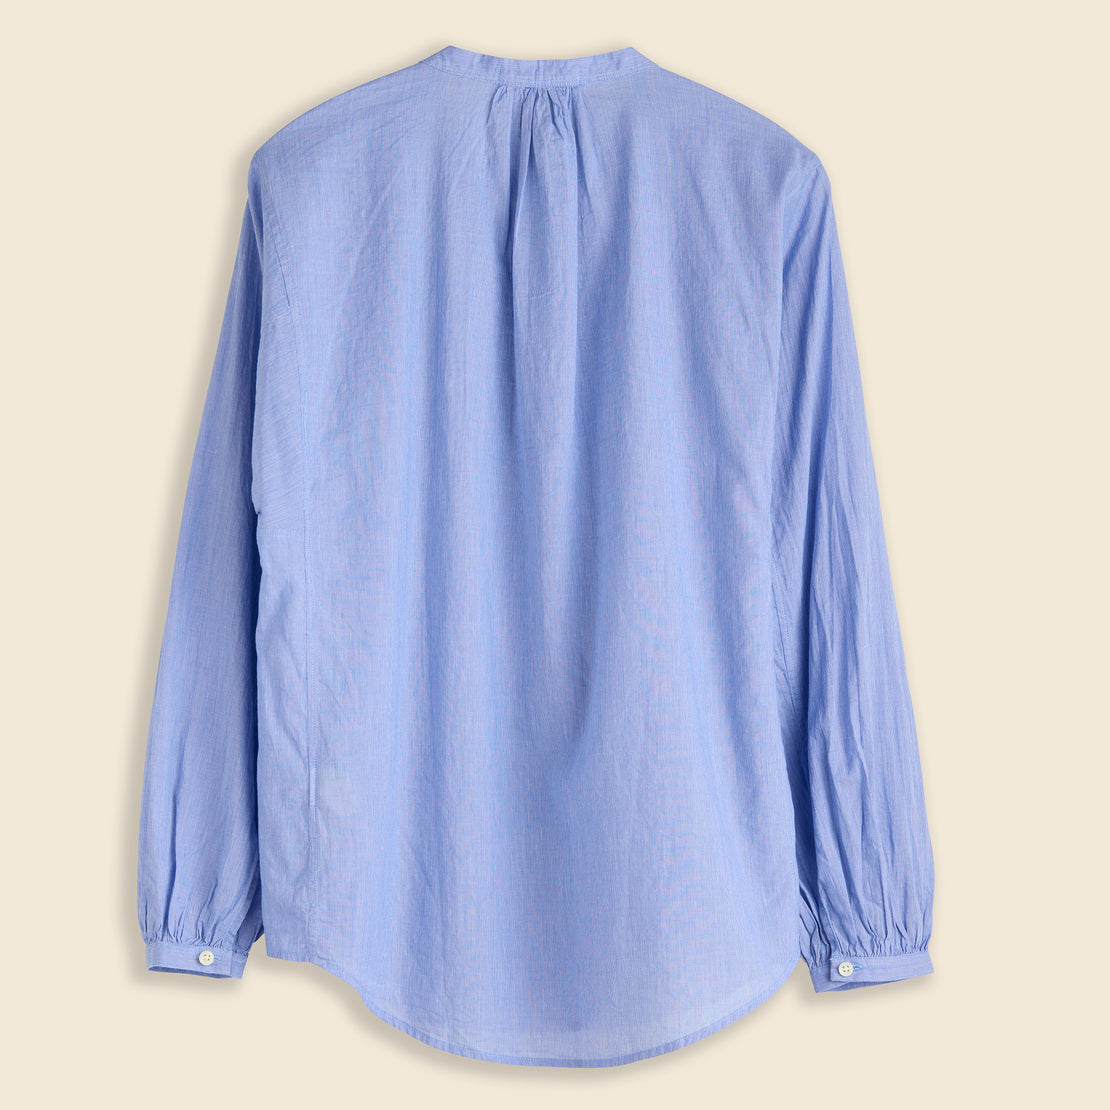 Katherine Shirt in End on End - Blue - Alex Mill - STAG Provisions - W - Tops - L/S Woven